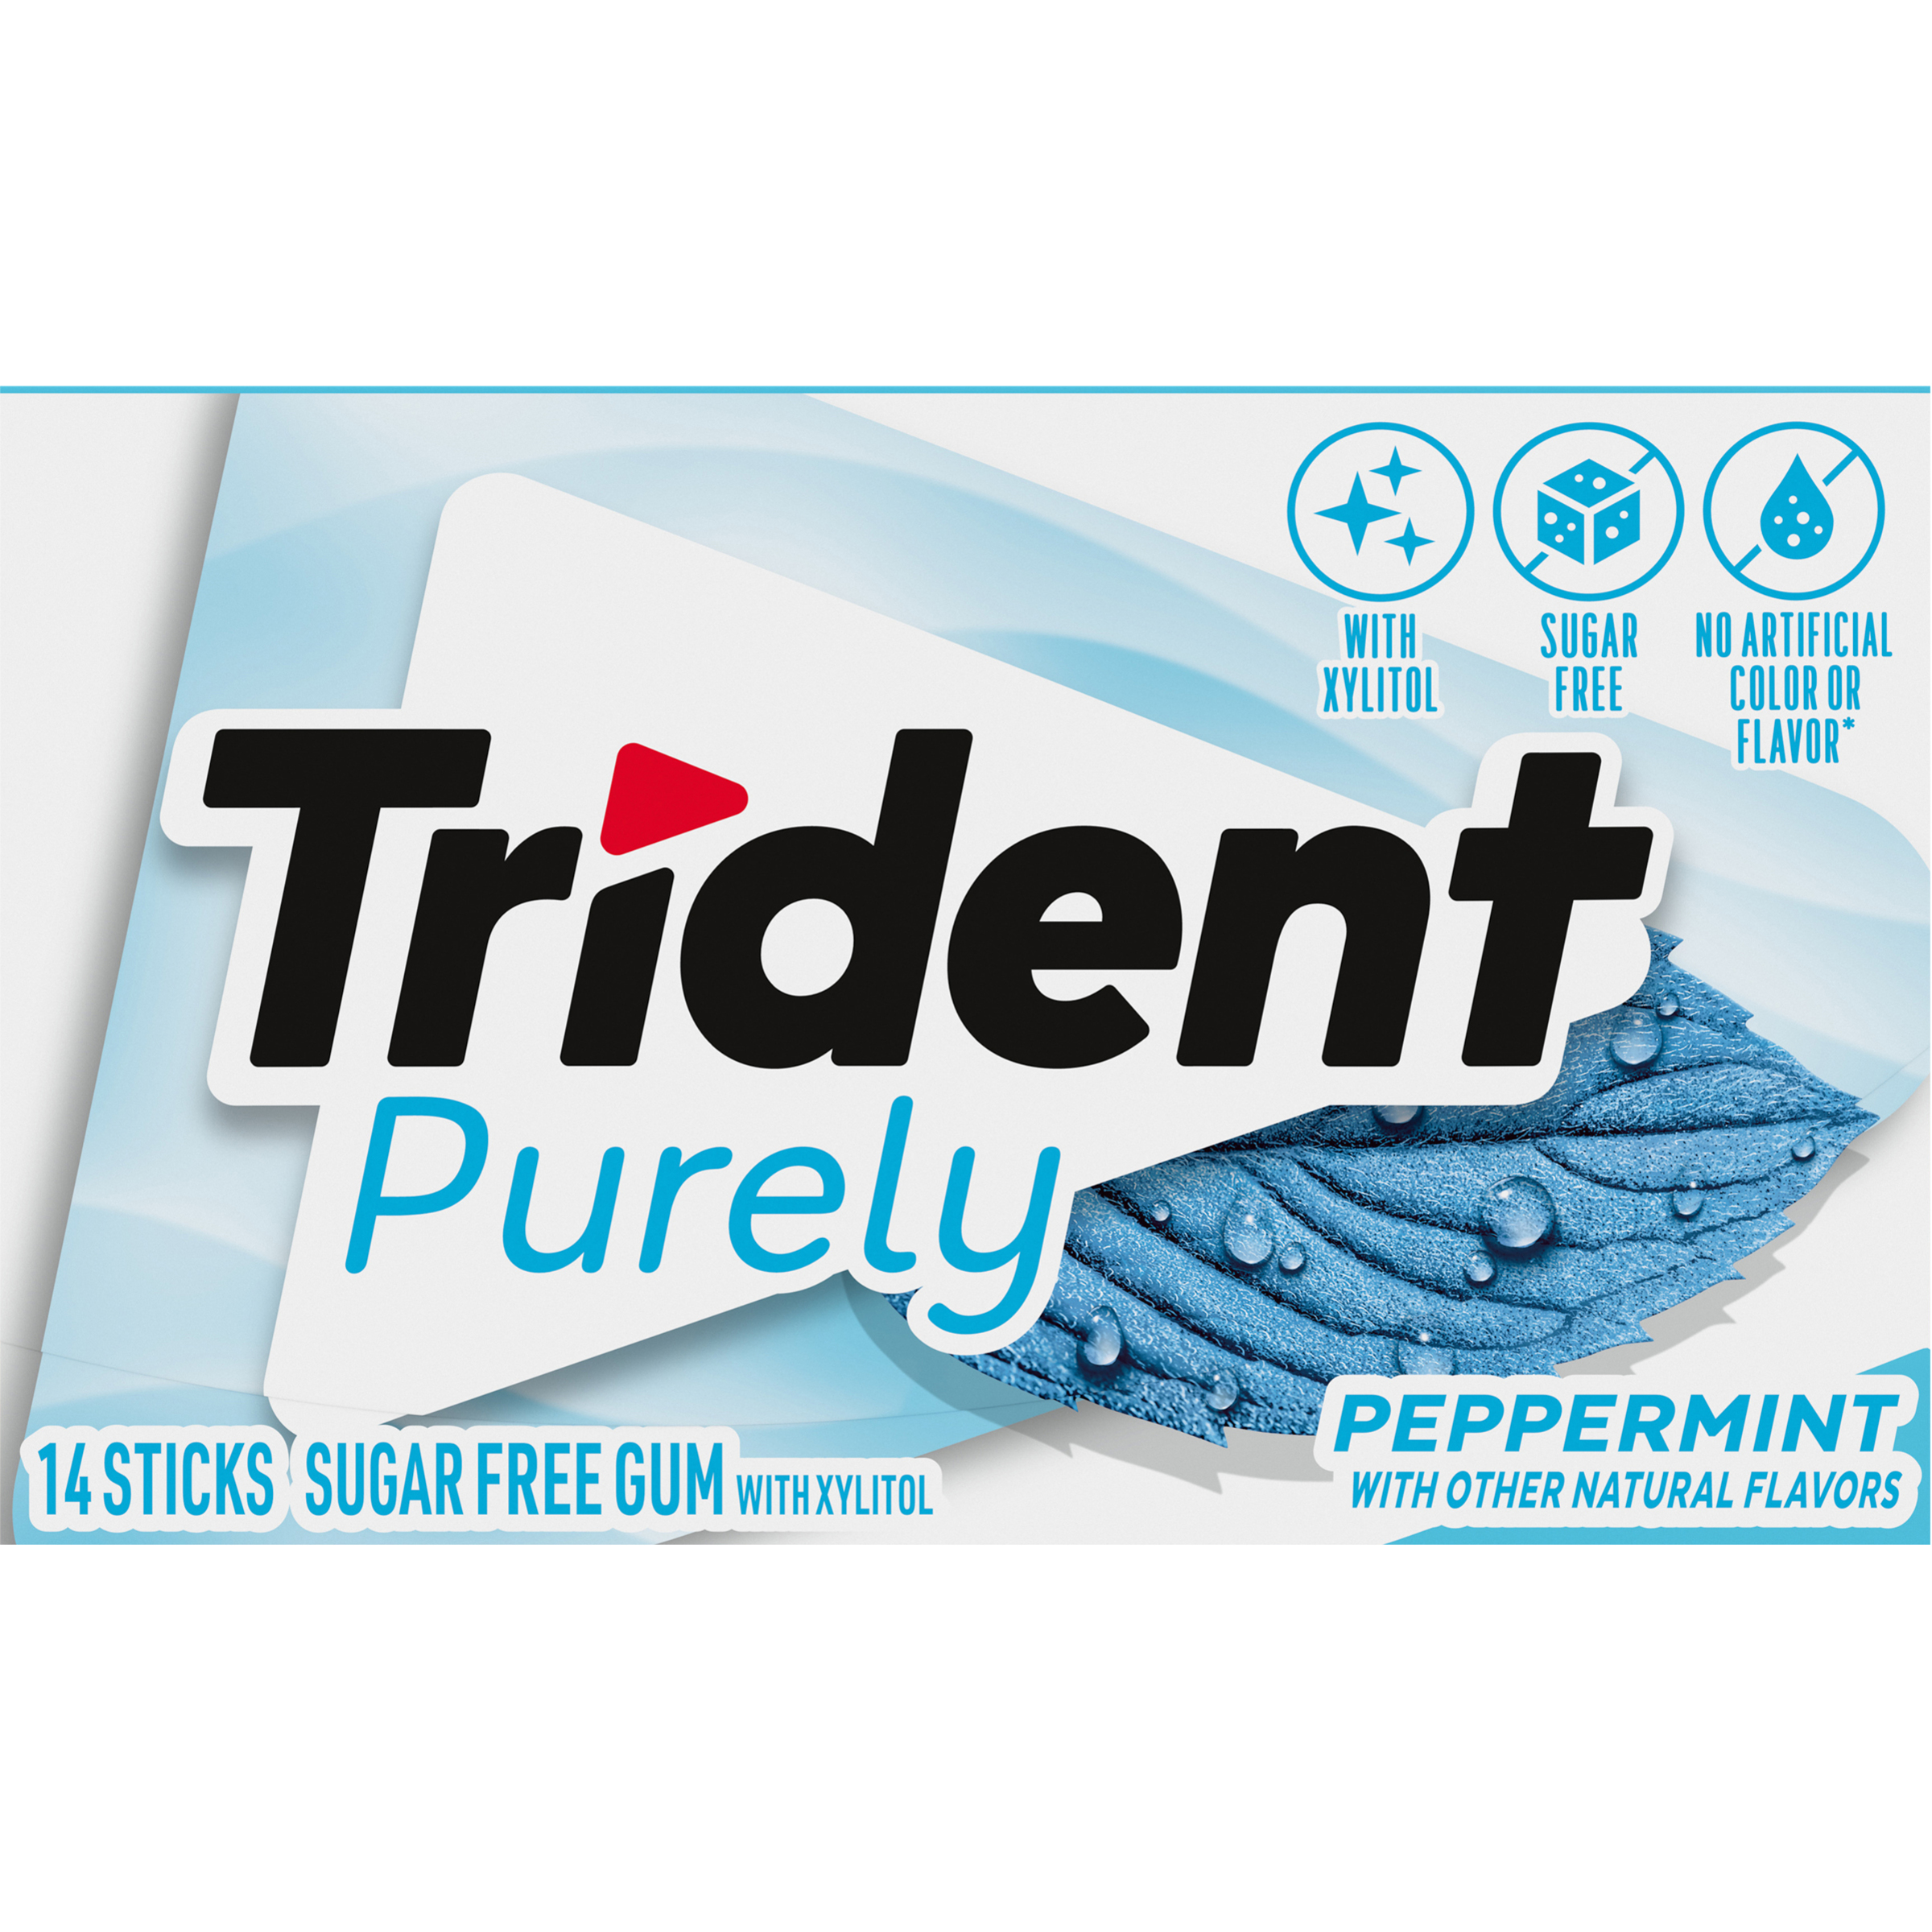 Trident Purely Peppermint Sugar Free Gum, 12 Packs of 14 Pieces (168 Total Pieces)-thumbnail-3